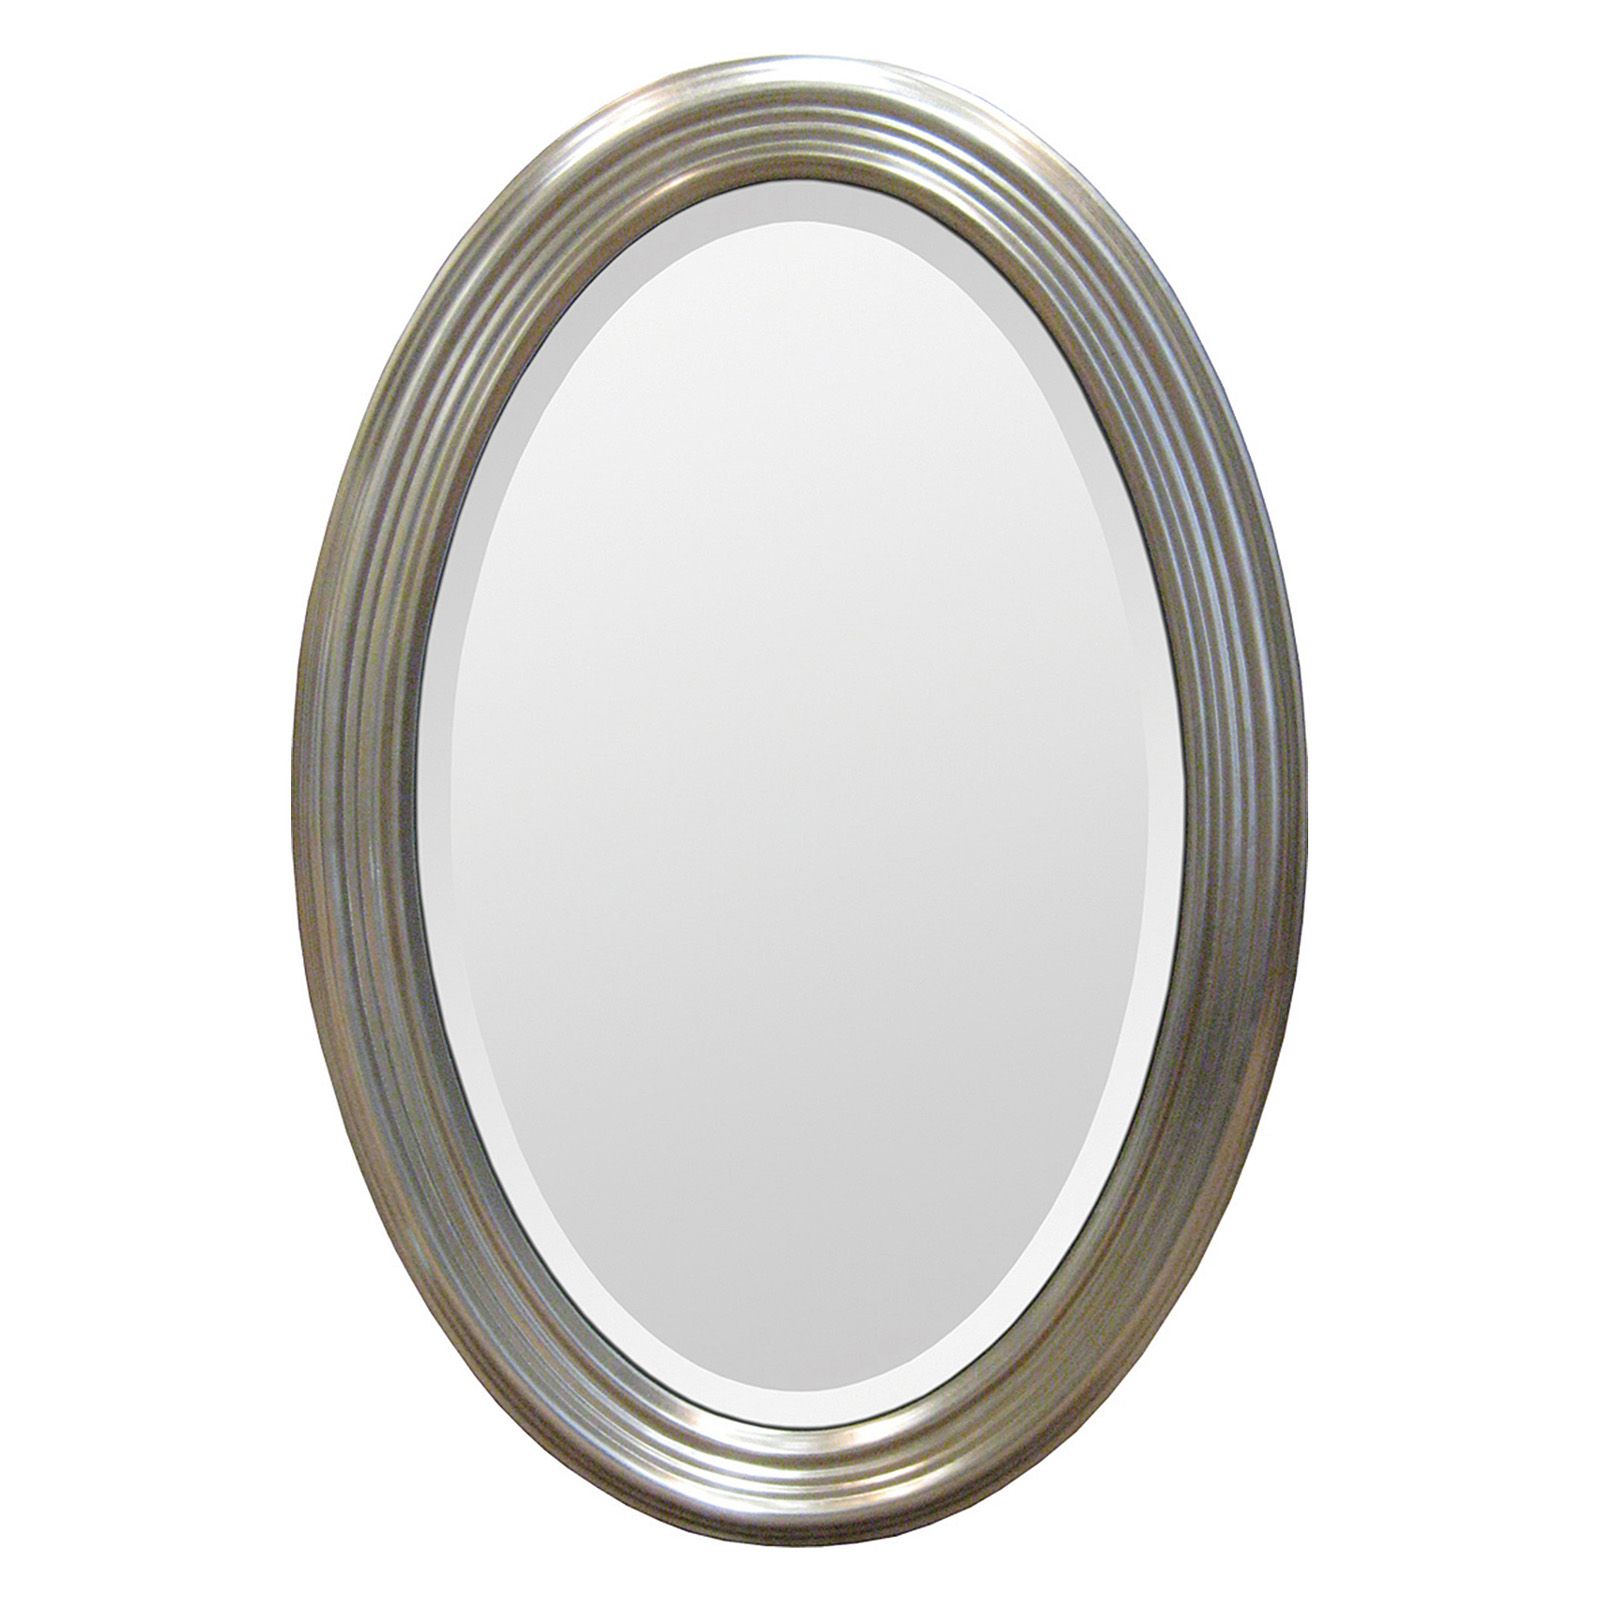 Ren Wil Silver Beveled Oval Wall Mirror – 21w X 31h In. – Mirrors At Intended For Oval Beveled Wall Mirrors (Photo 5 of 15)